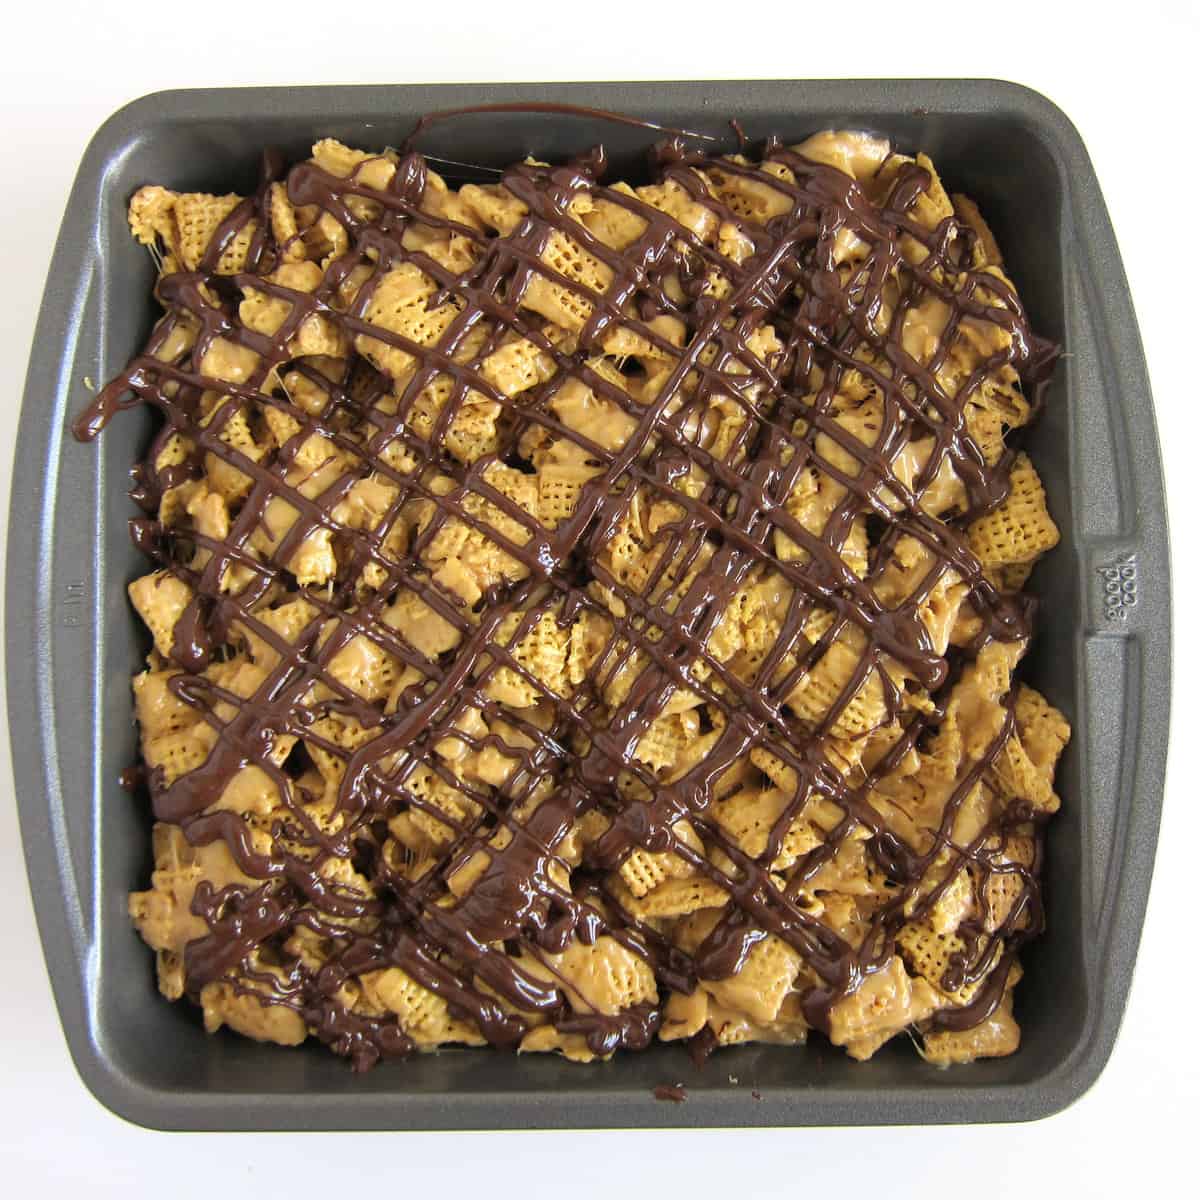 Chex Bars drizzled with melted chocolate